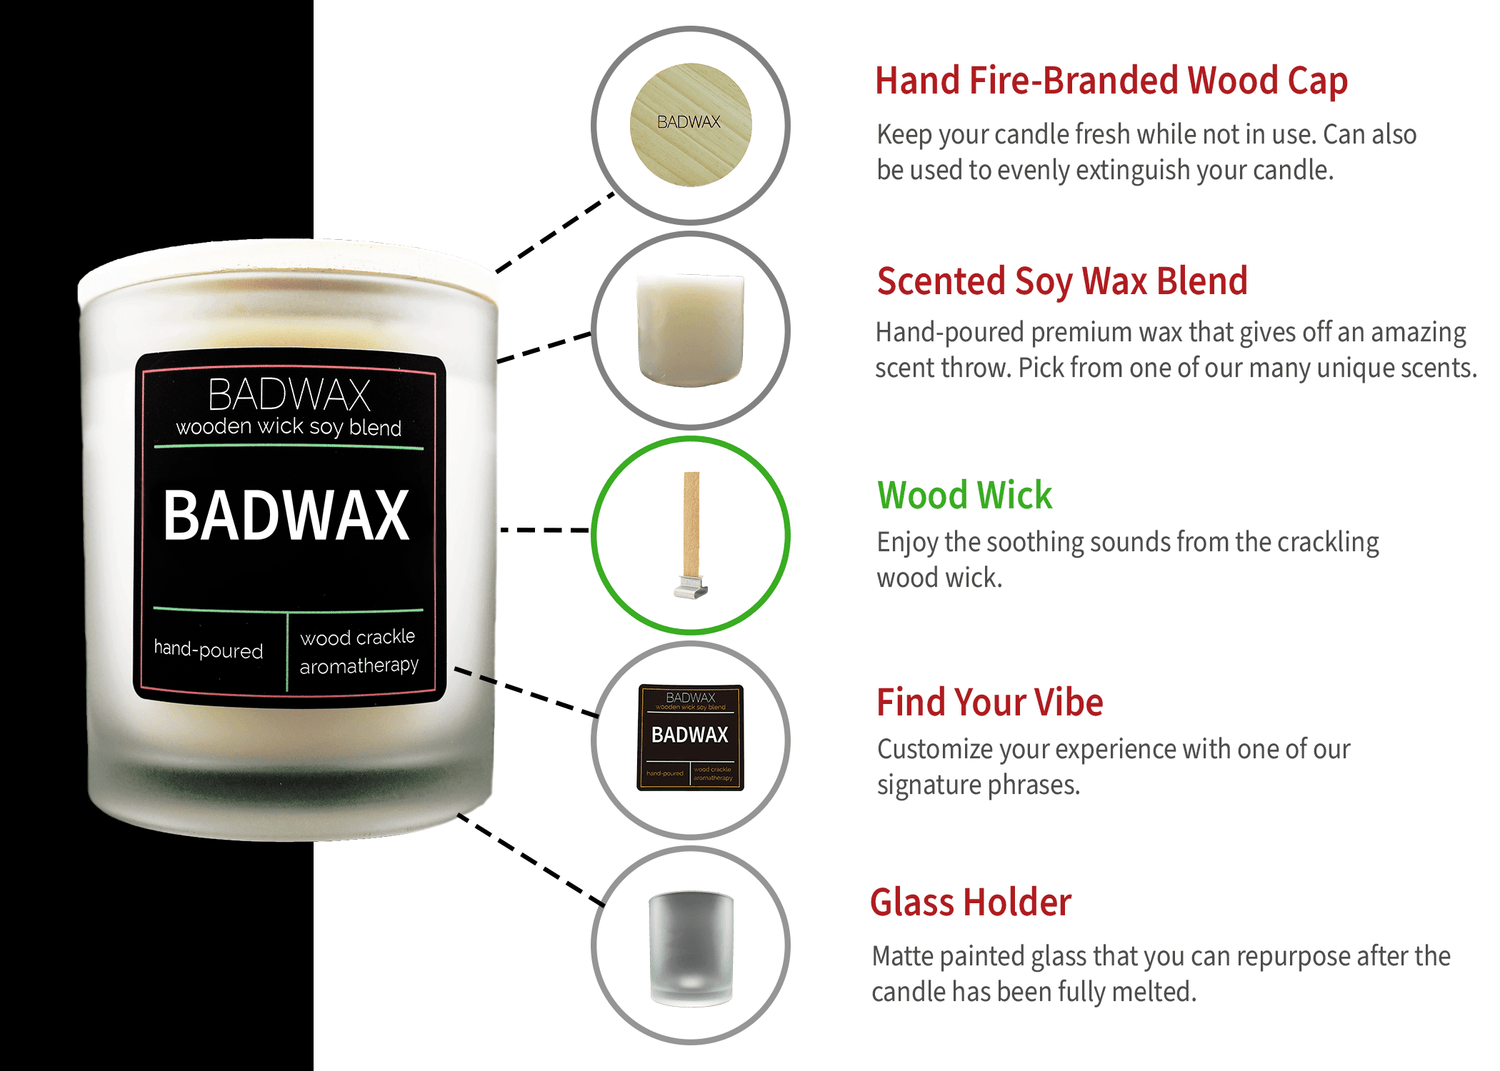 Merry Christmas And Shit - Woodwick Candle - BADWAX